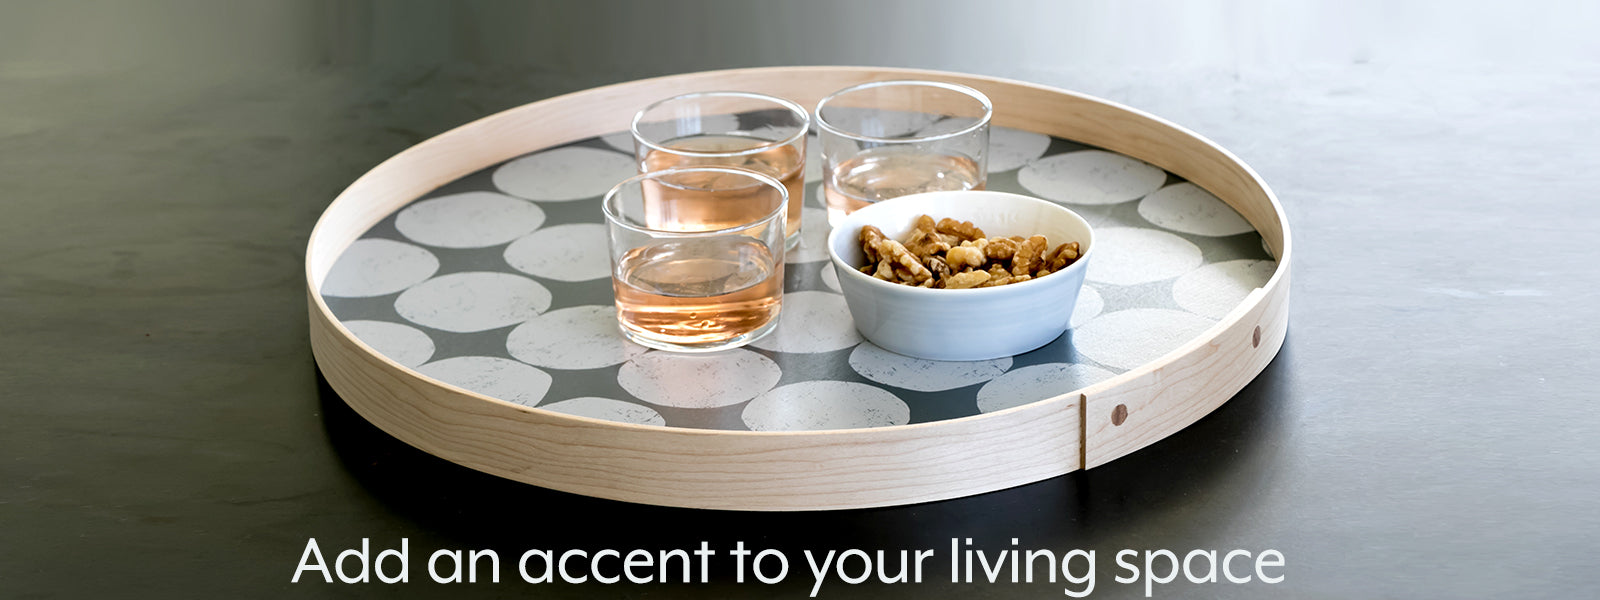 handcrafted round tray - add an accent in your living space